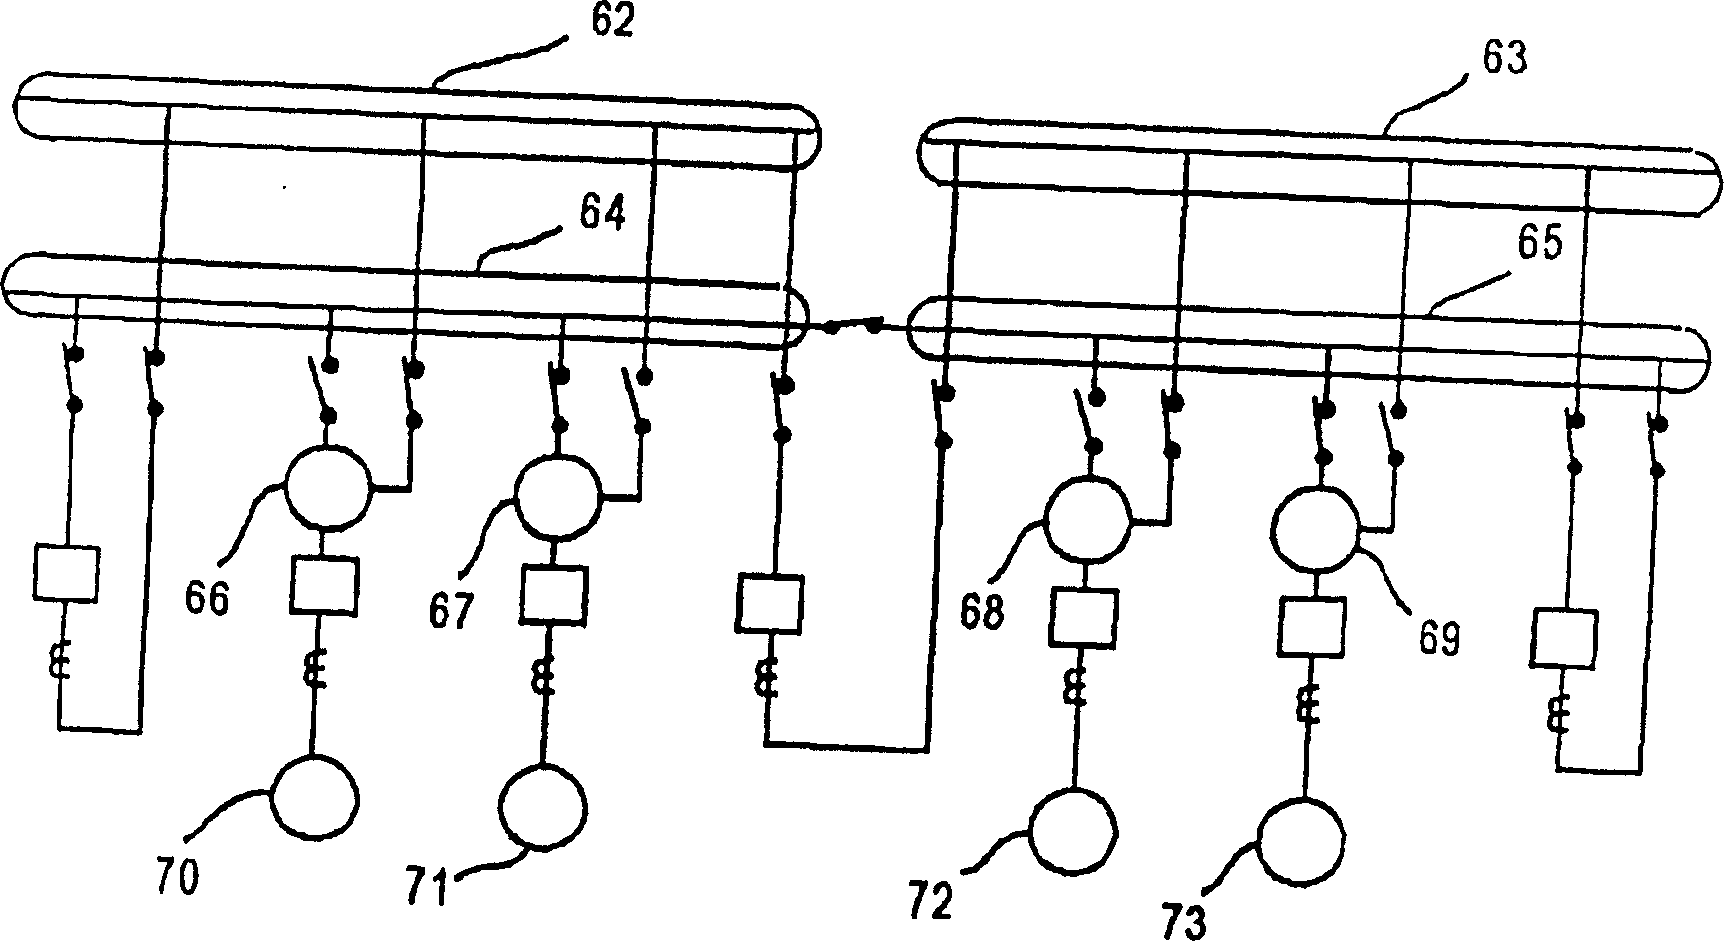 Protection zone selection system in relay based on microprocessor of electric power system